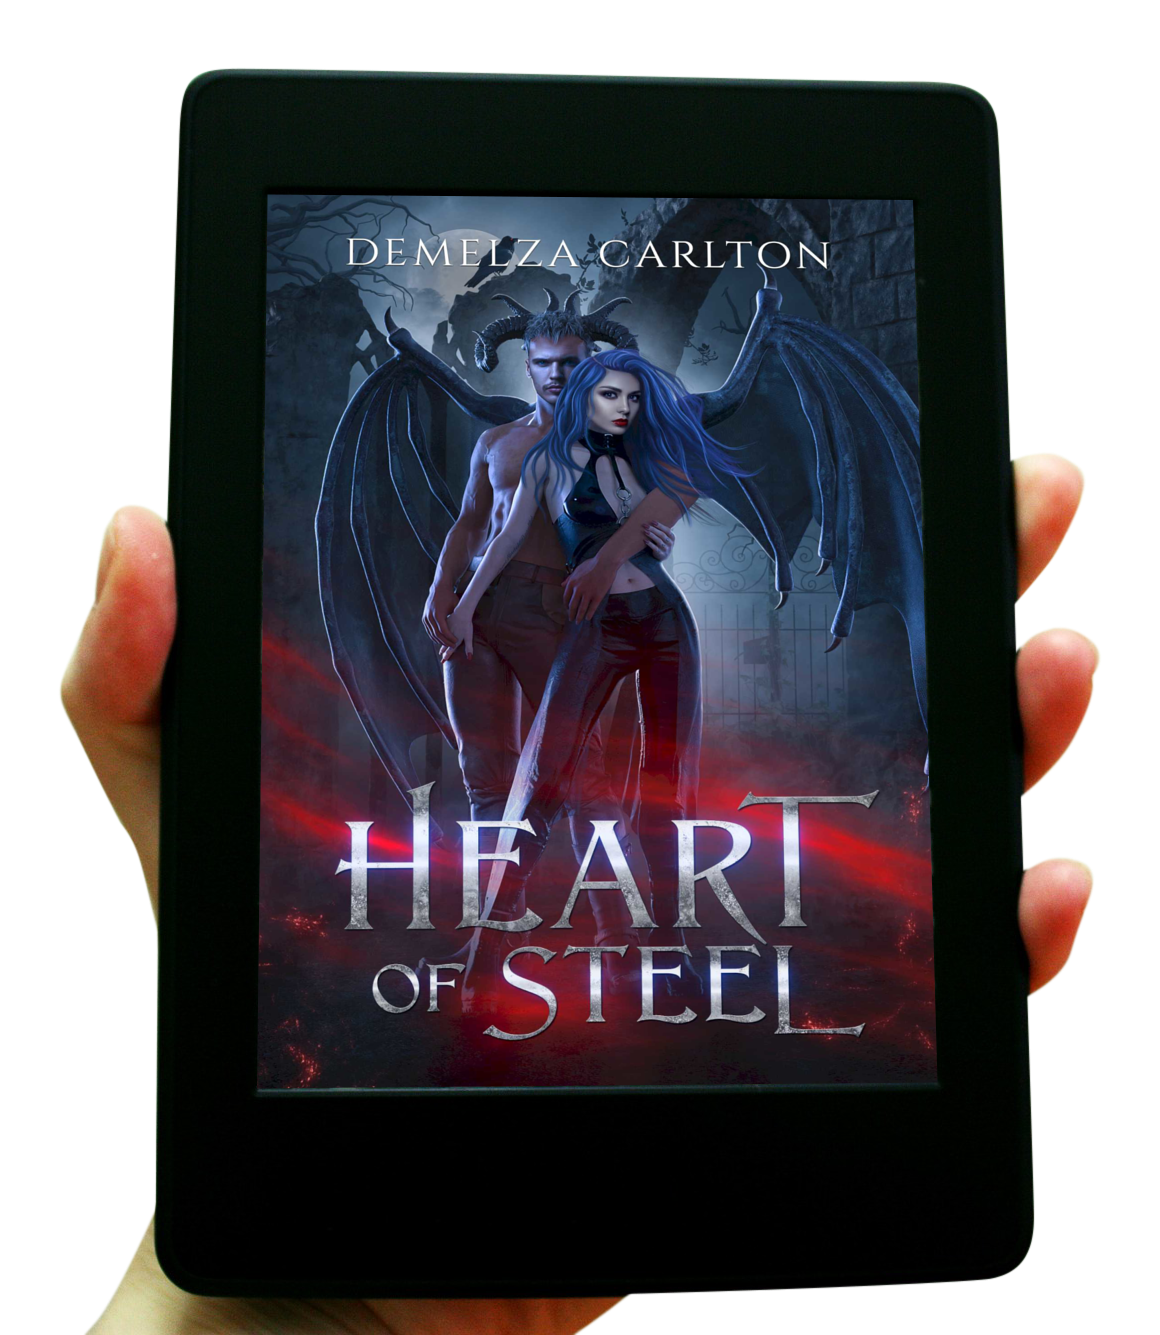 A steamy paranormal protector demon gargoyle monster romance tale for fans of Sarah J Maas, ACOTAR, Rebecca Yarros and Charlaine Harris